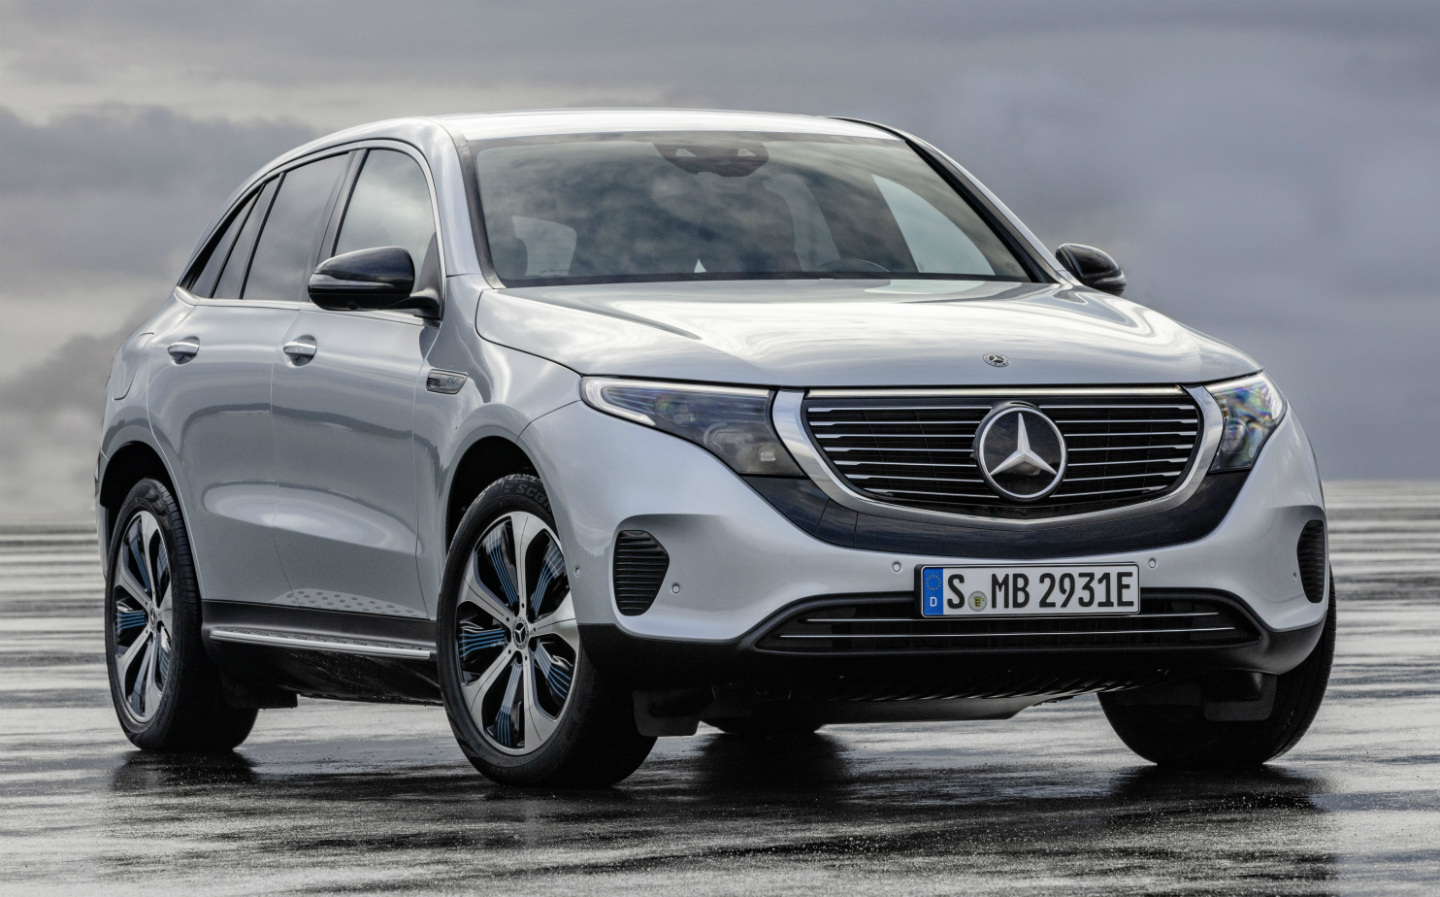 Sunday Times Motor Awards 2019 Best Electric Car of the Year. Mercedes-Benz EQC